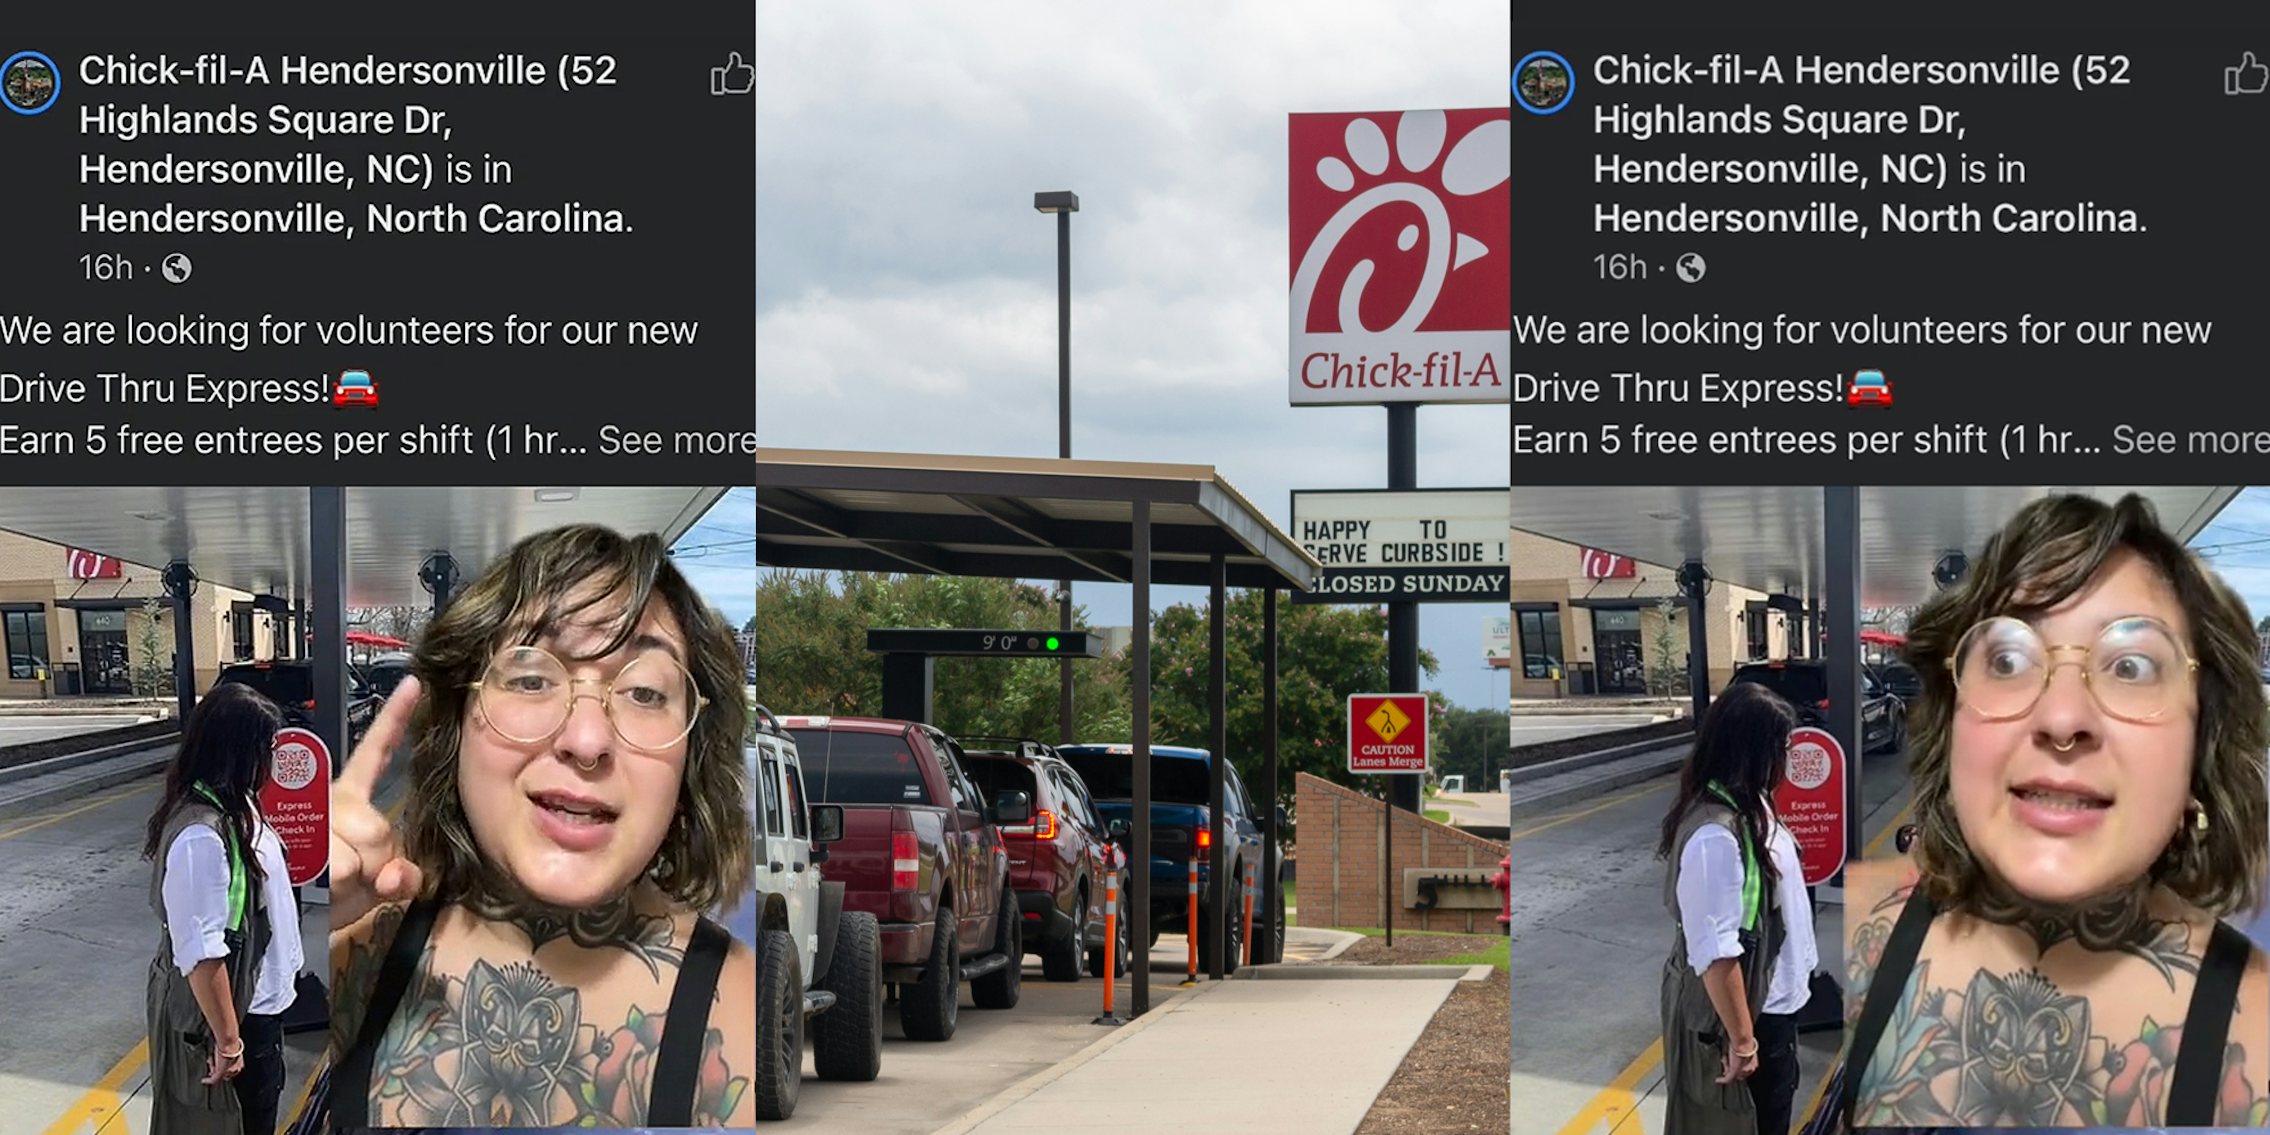 person greenscreen tiktok over Facebook post by Chipotle caption 'Chick-fil-A Hendersonville (52 Highlands Square Dr, Hendersonville, NC) is in Hendersonville, North Carolina We are looking for volunteers for our new Drive Thru Express! Earn 5 free entrees per shift' (l) Chick-fil-A drive thru with sign (c) person greenscreen tiktok over Facebook post by Chipotle caption 'Chick-fil-A Hendersonville (52 Highlands Square Dr, Hendersonville, NC) is in Hendersonville, North Carolina We are looking for volunteers for our new Drive Thru Express! Earn 5 free entrees per shift' (r)